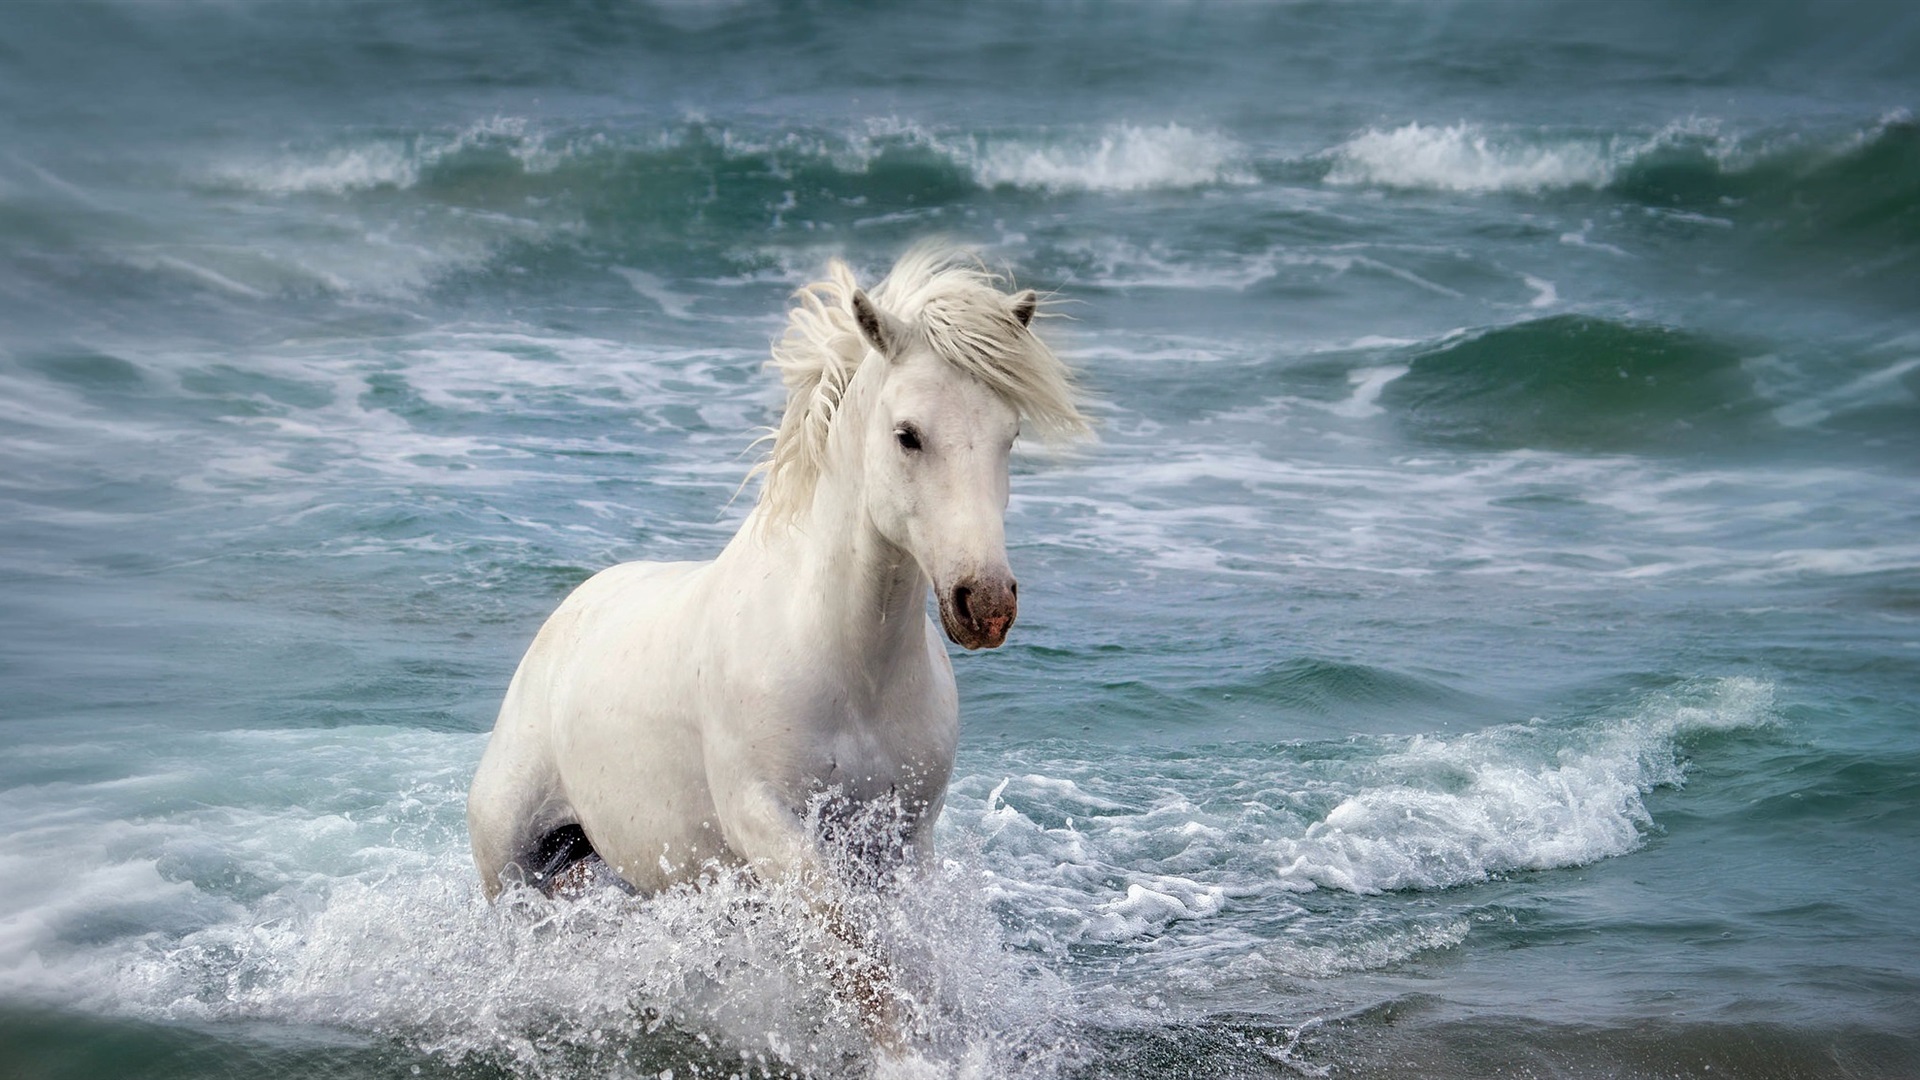 Wallpaper White Horse In The Sea, Waves - Horse In The Water - HD Wallpaper 